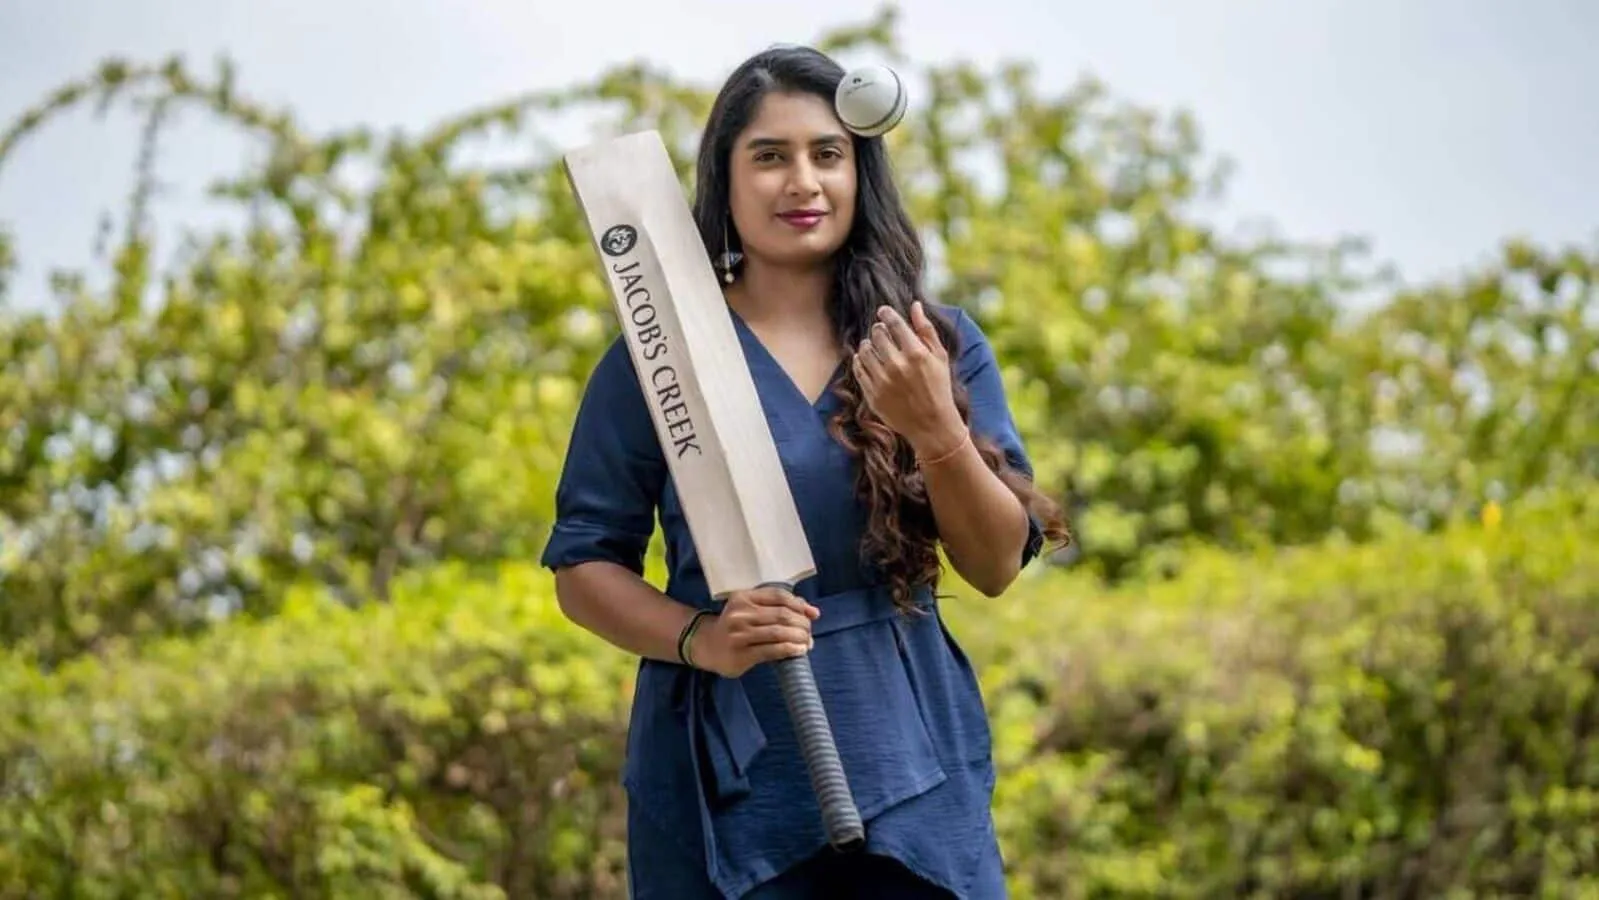 Indian women's cricket team has a great chance to claim medal at CWG: Mithali Raj | sportzPoint.com